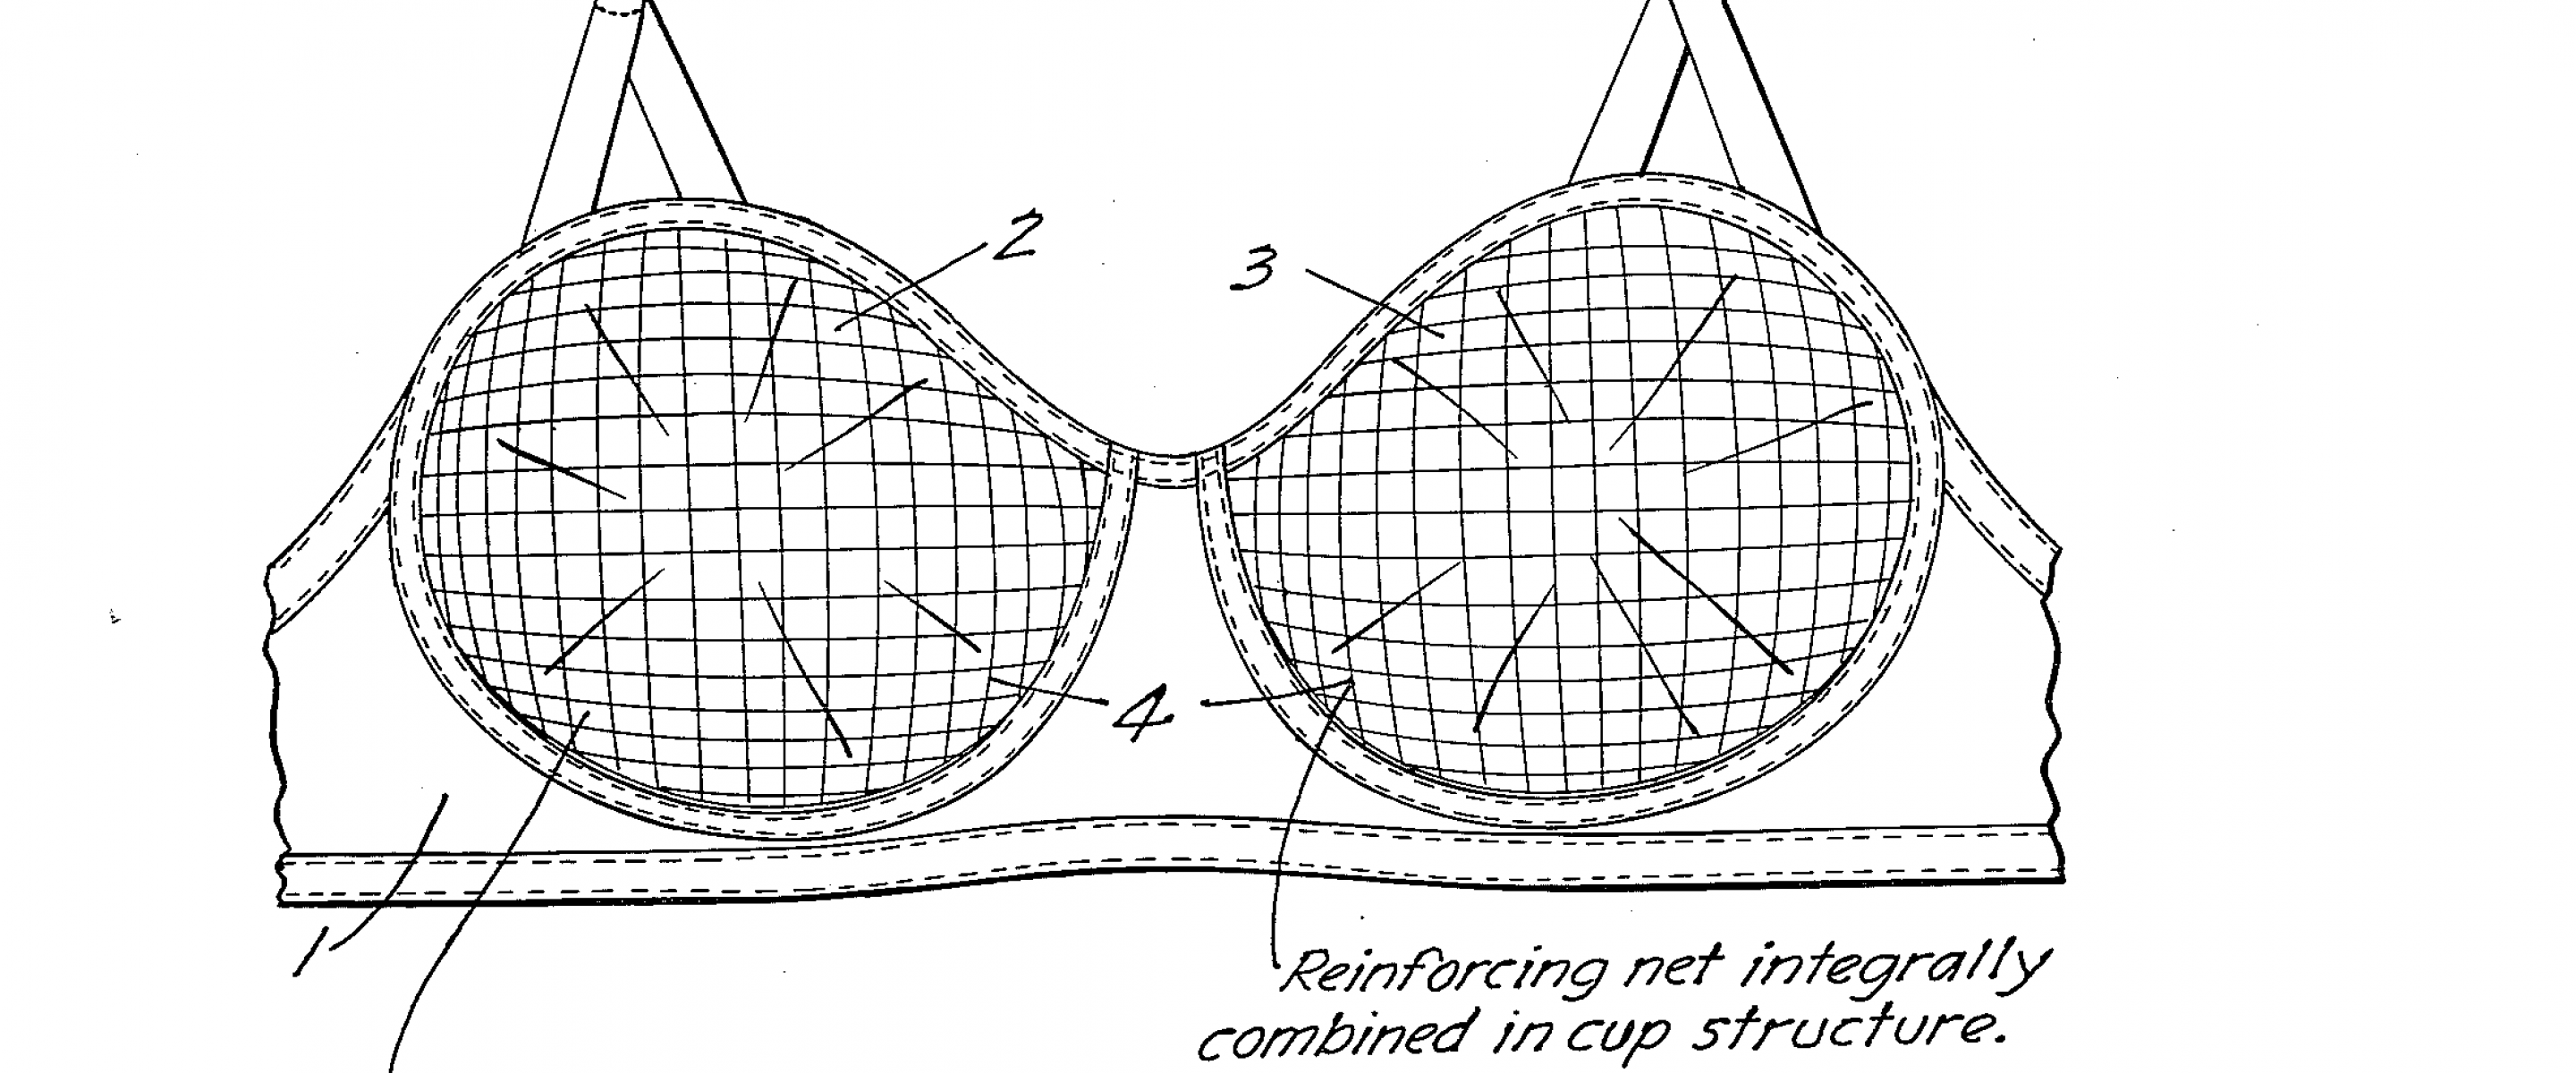 https://storycode.co/wp-content/uploads/2020/03/bra-patent-2-2880x1200.png